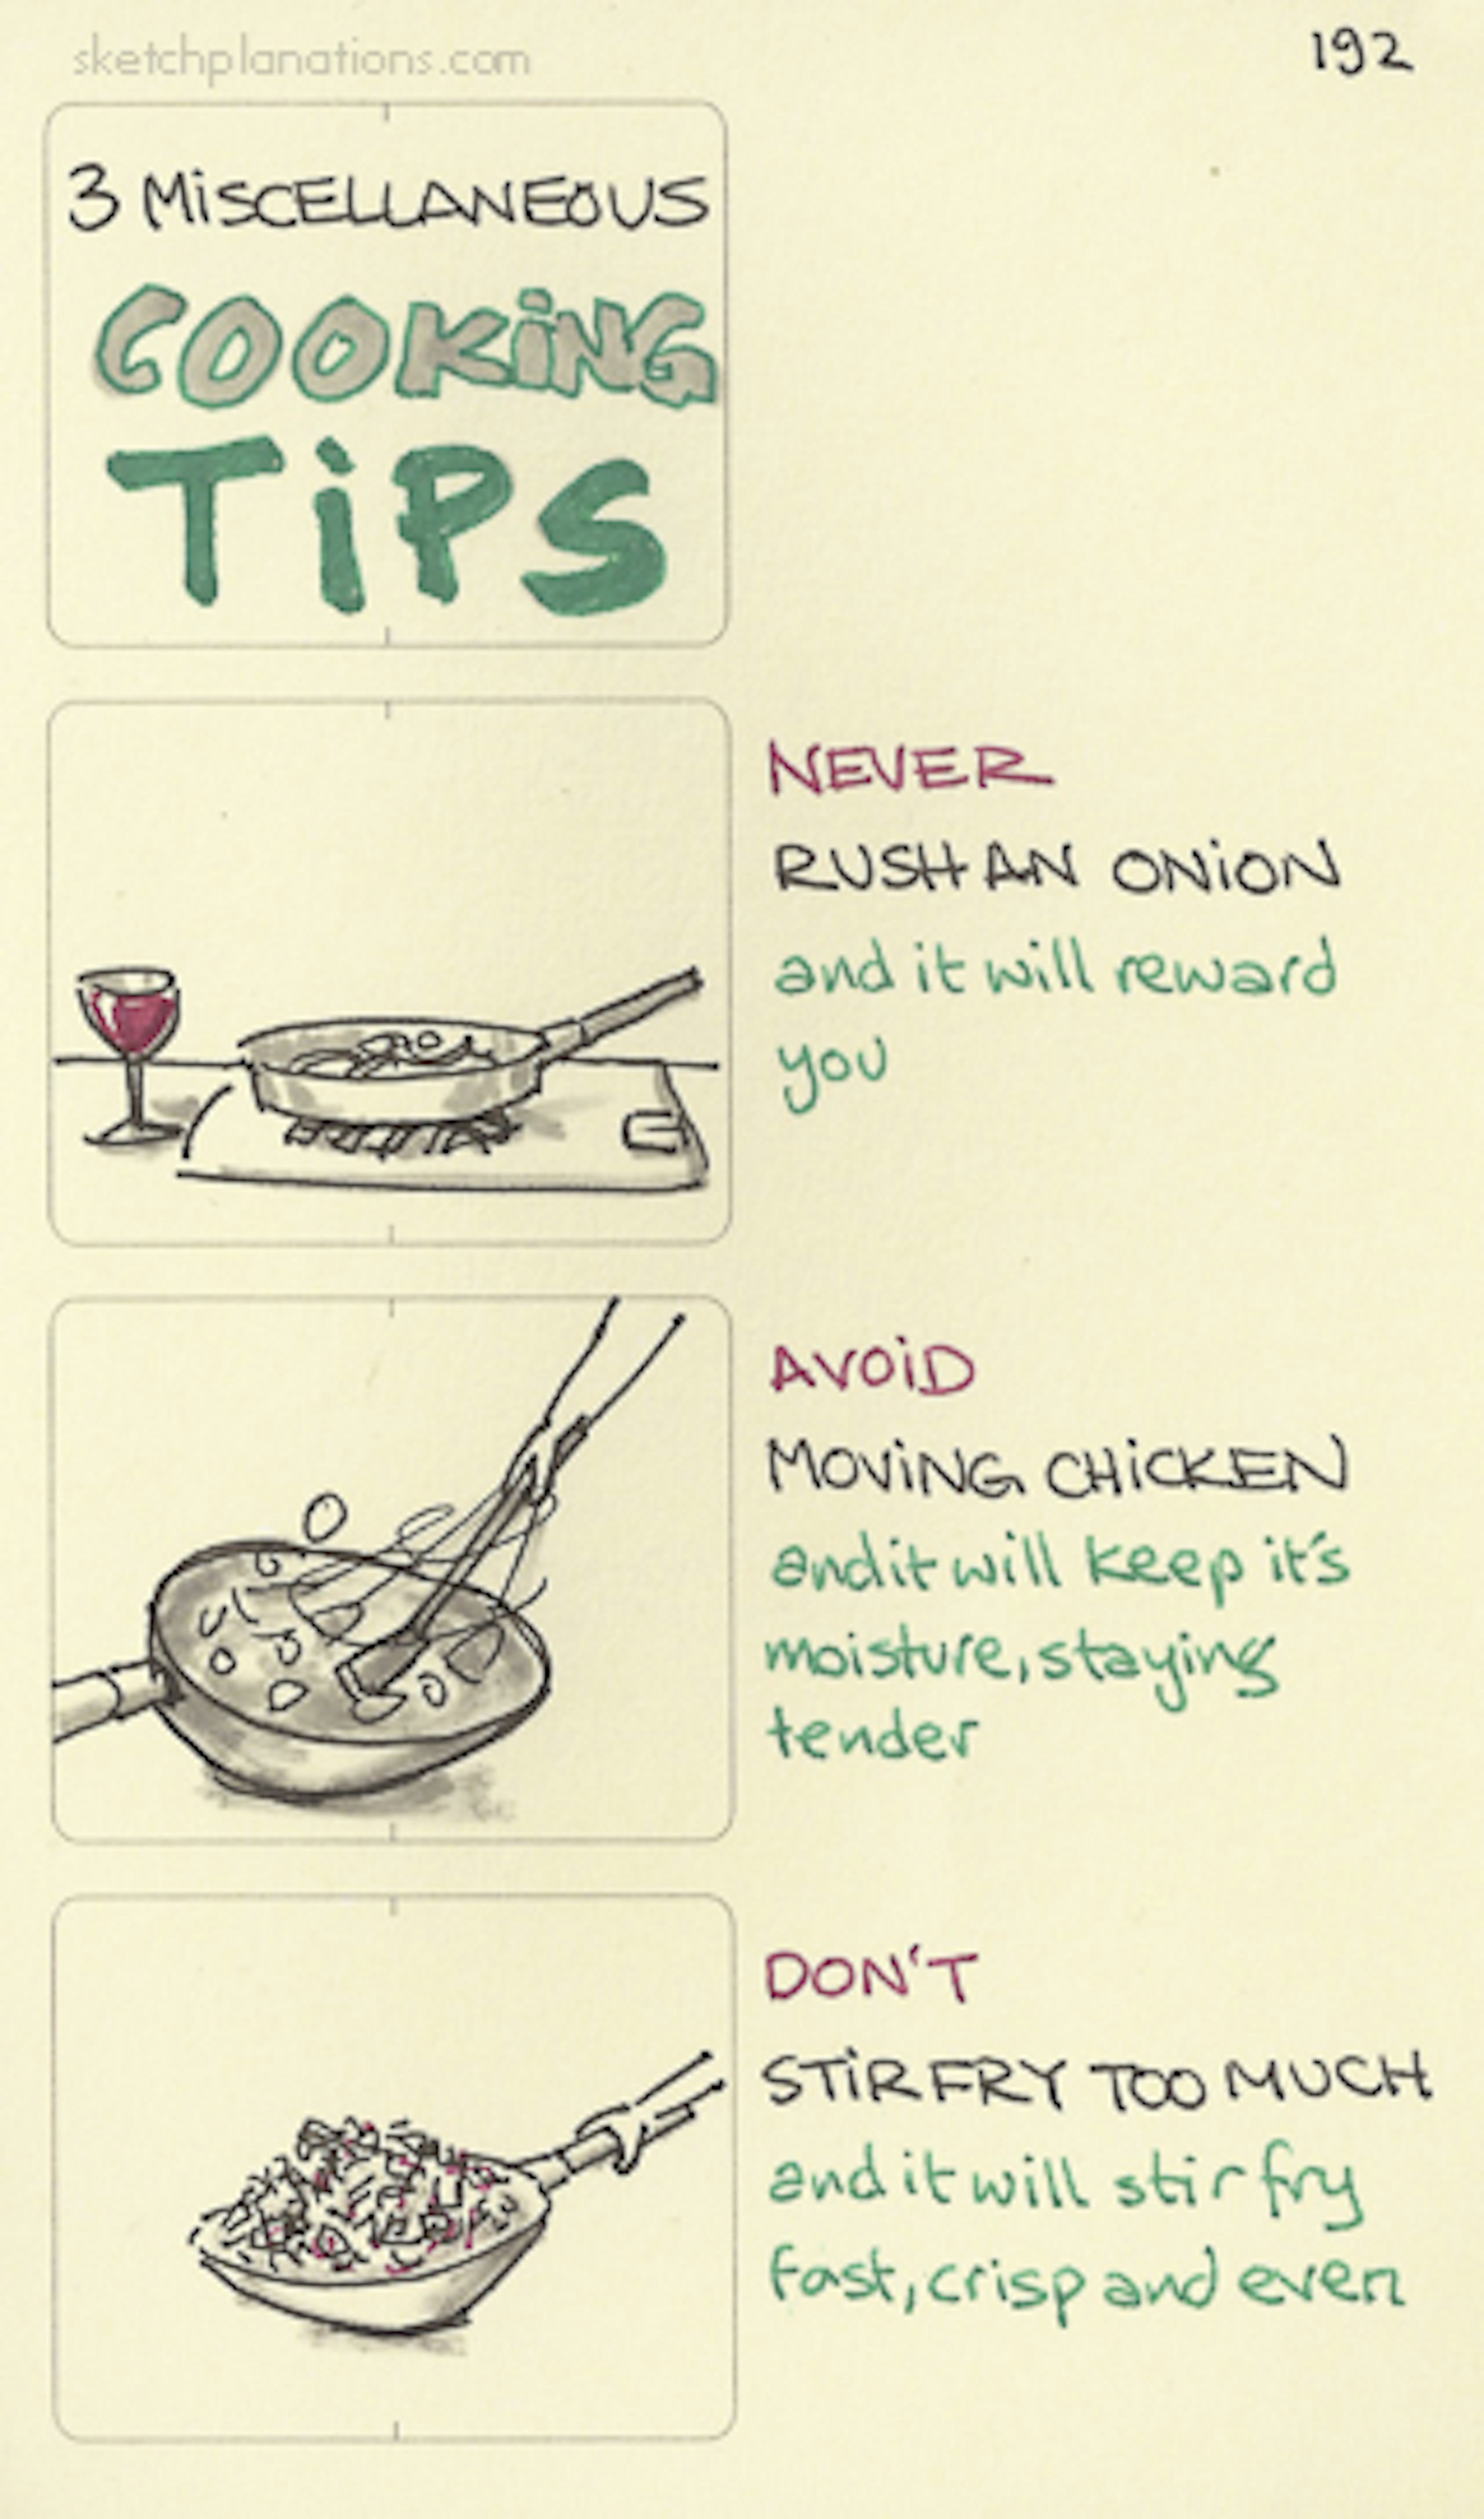 3 Miscellaneous cooking tips - Sketchplanations